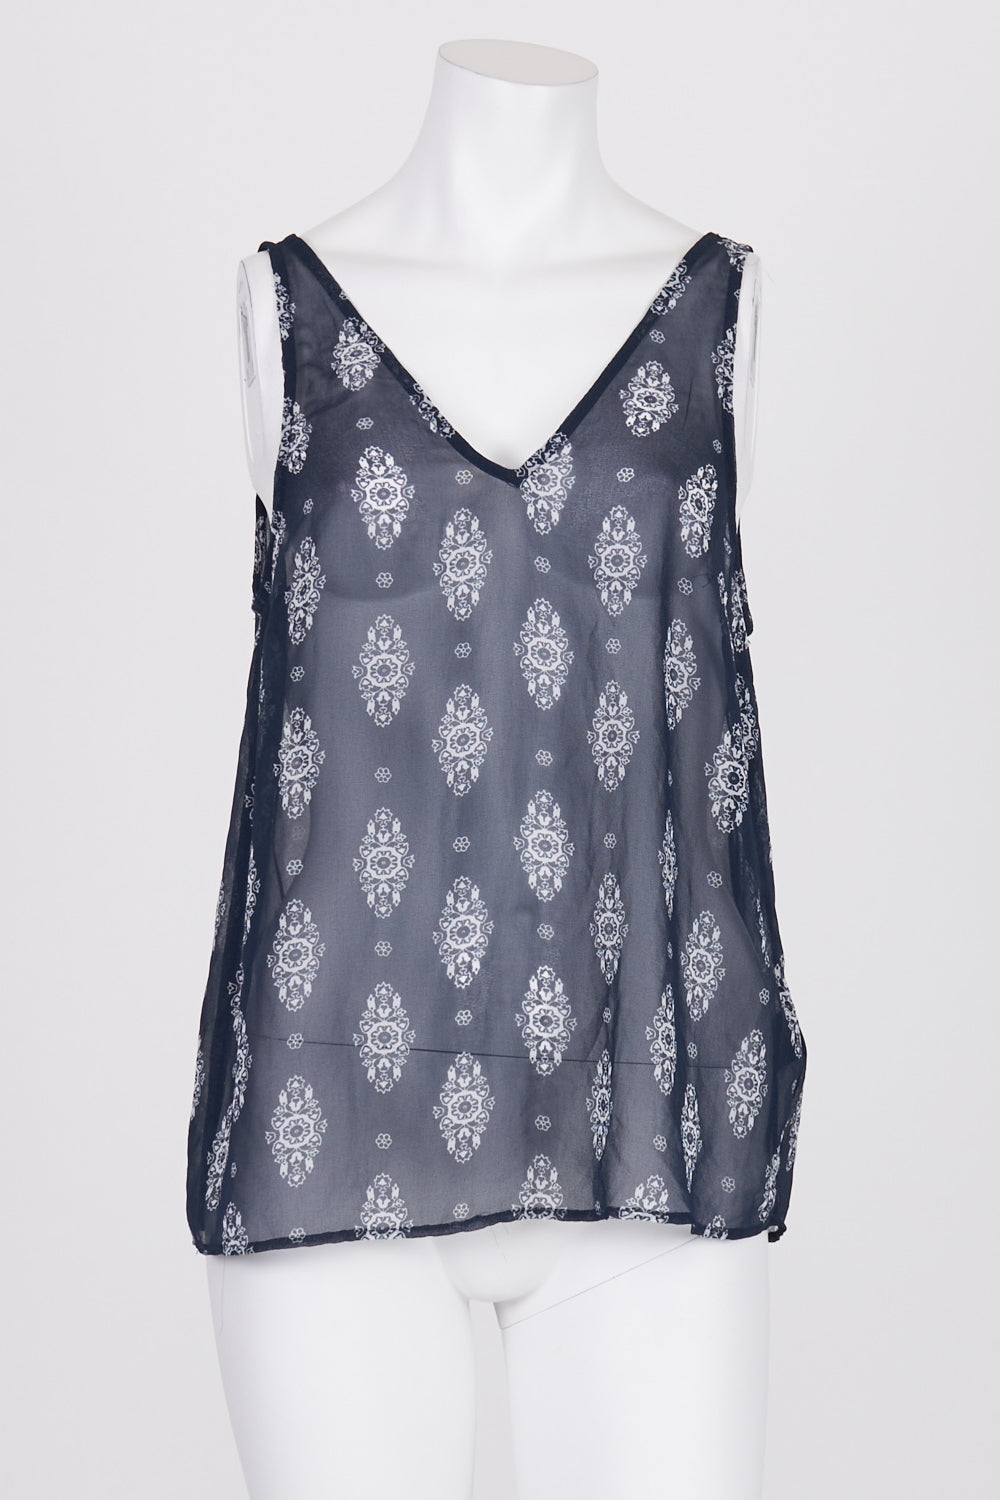 The Fifth Label Navy Patterned Sheer Top S